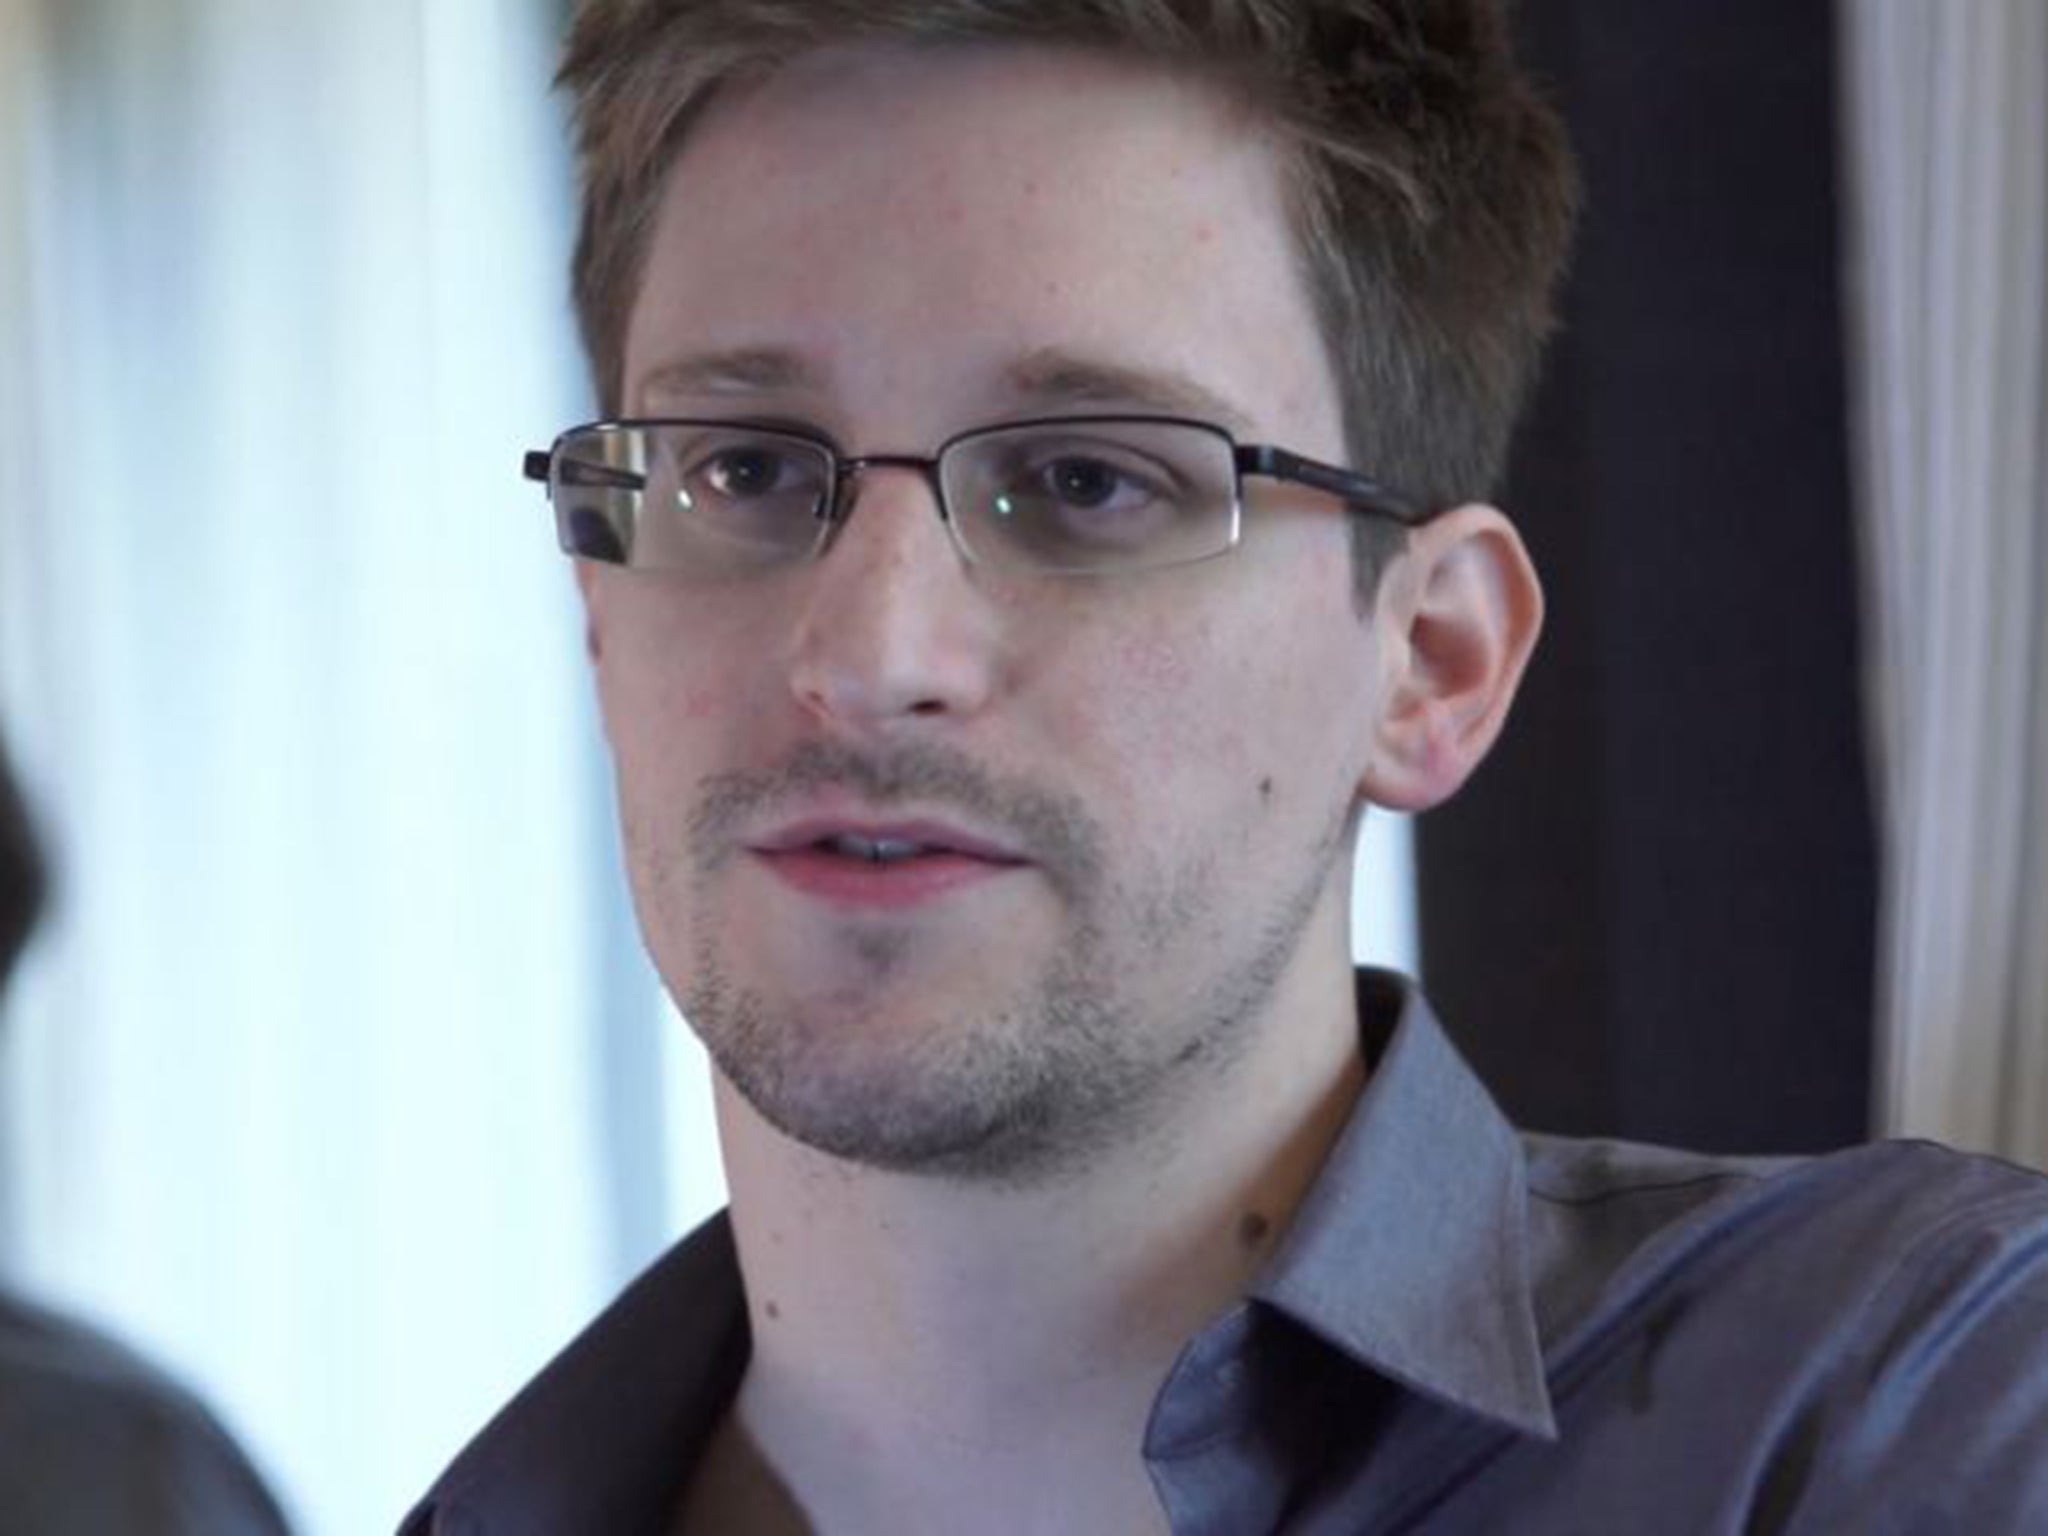 Edward Snowden remains wanted by US authorities